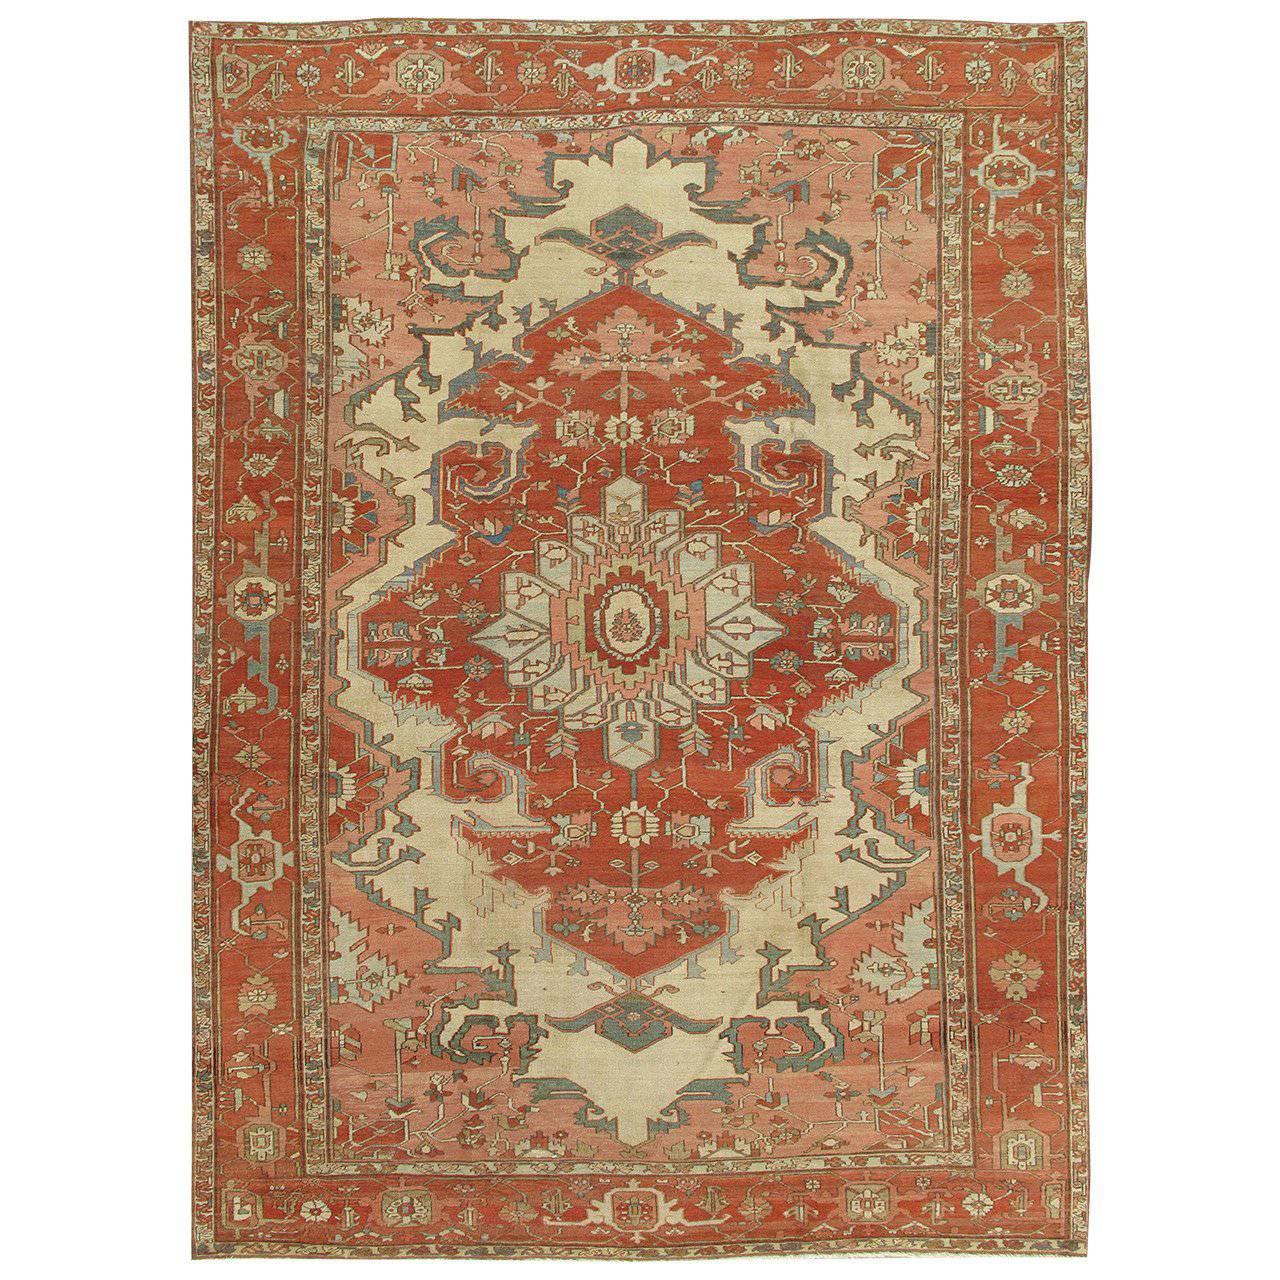 Antique Persian Serapi Carpet, Ivory Hand-Knotted Wool Oriental Rug